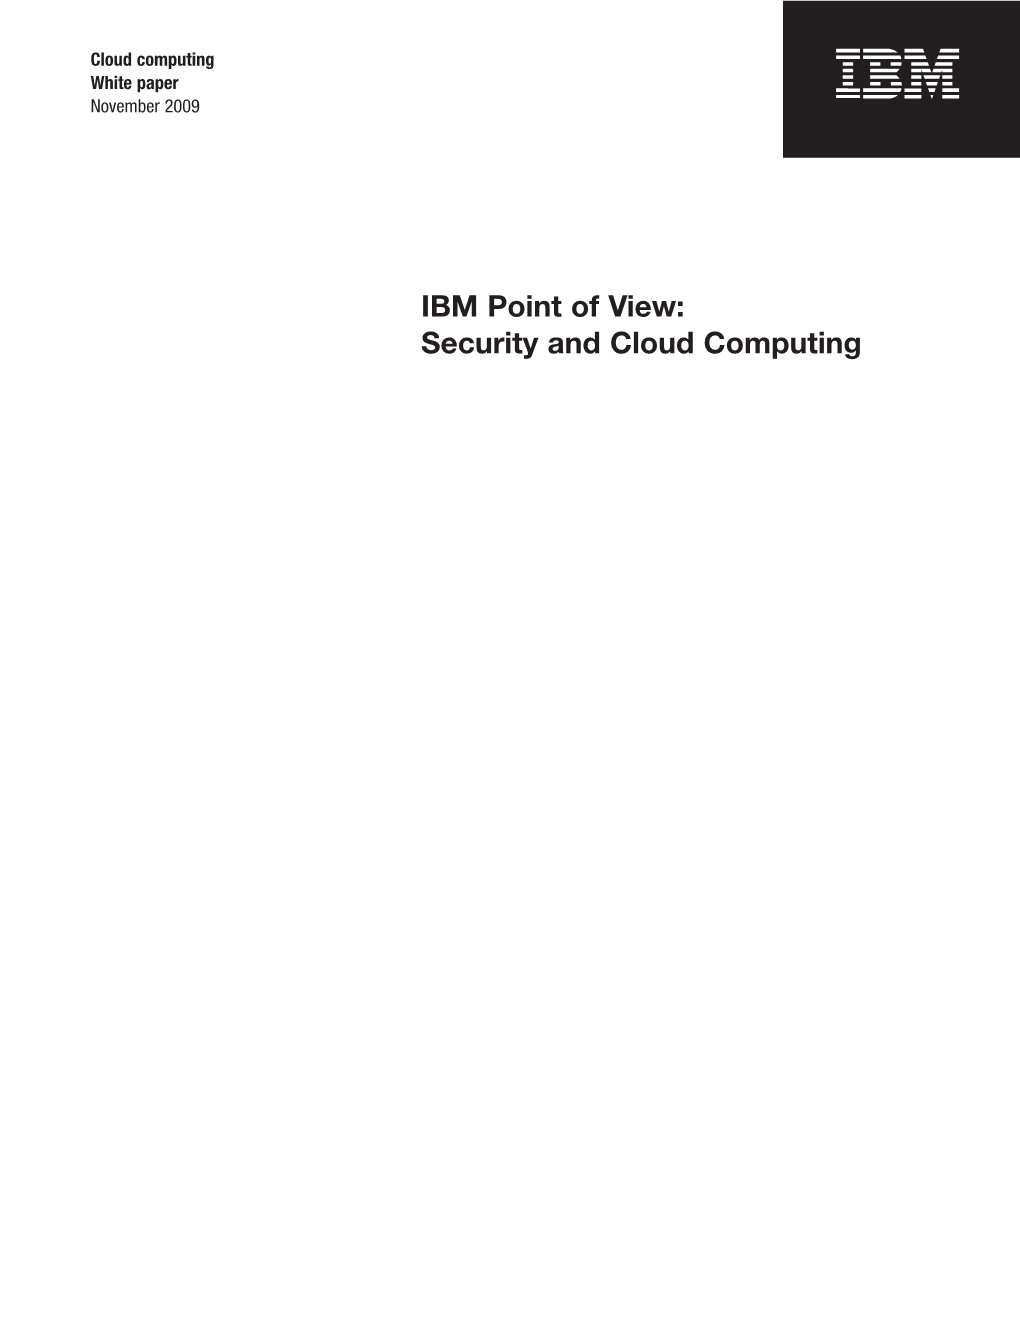 IBM Point of View: Security and Cloud Computing Cloud Computing Page 2